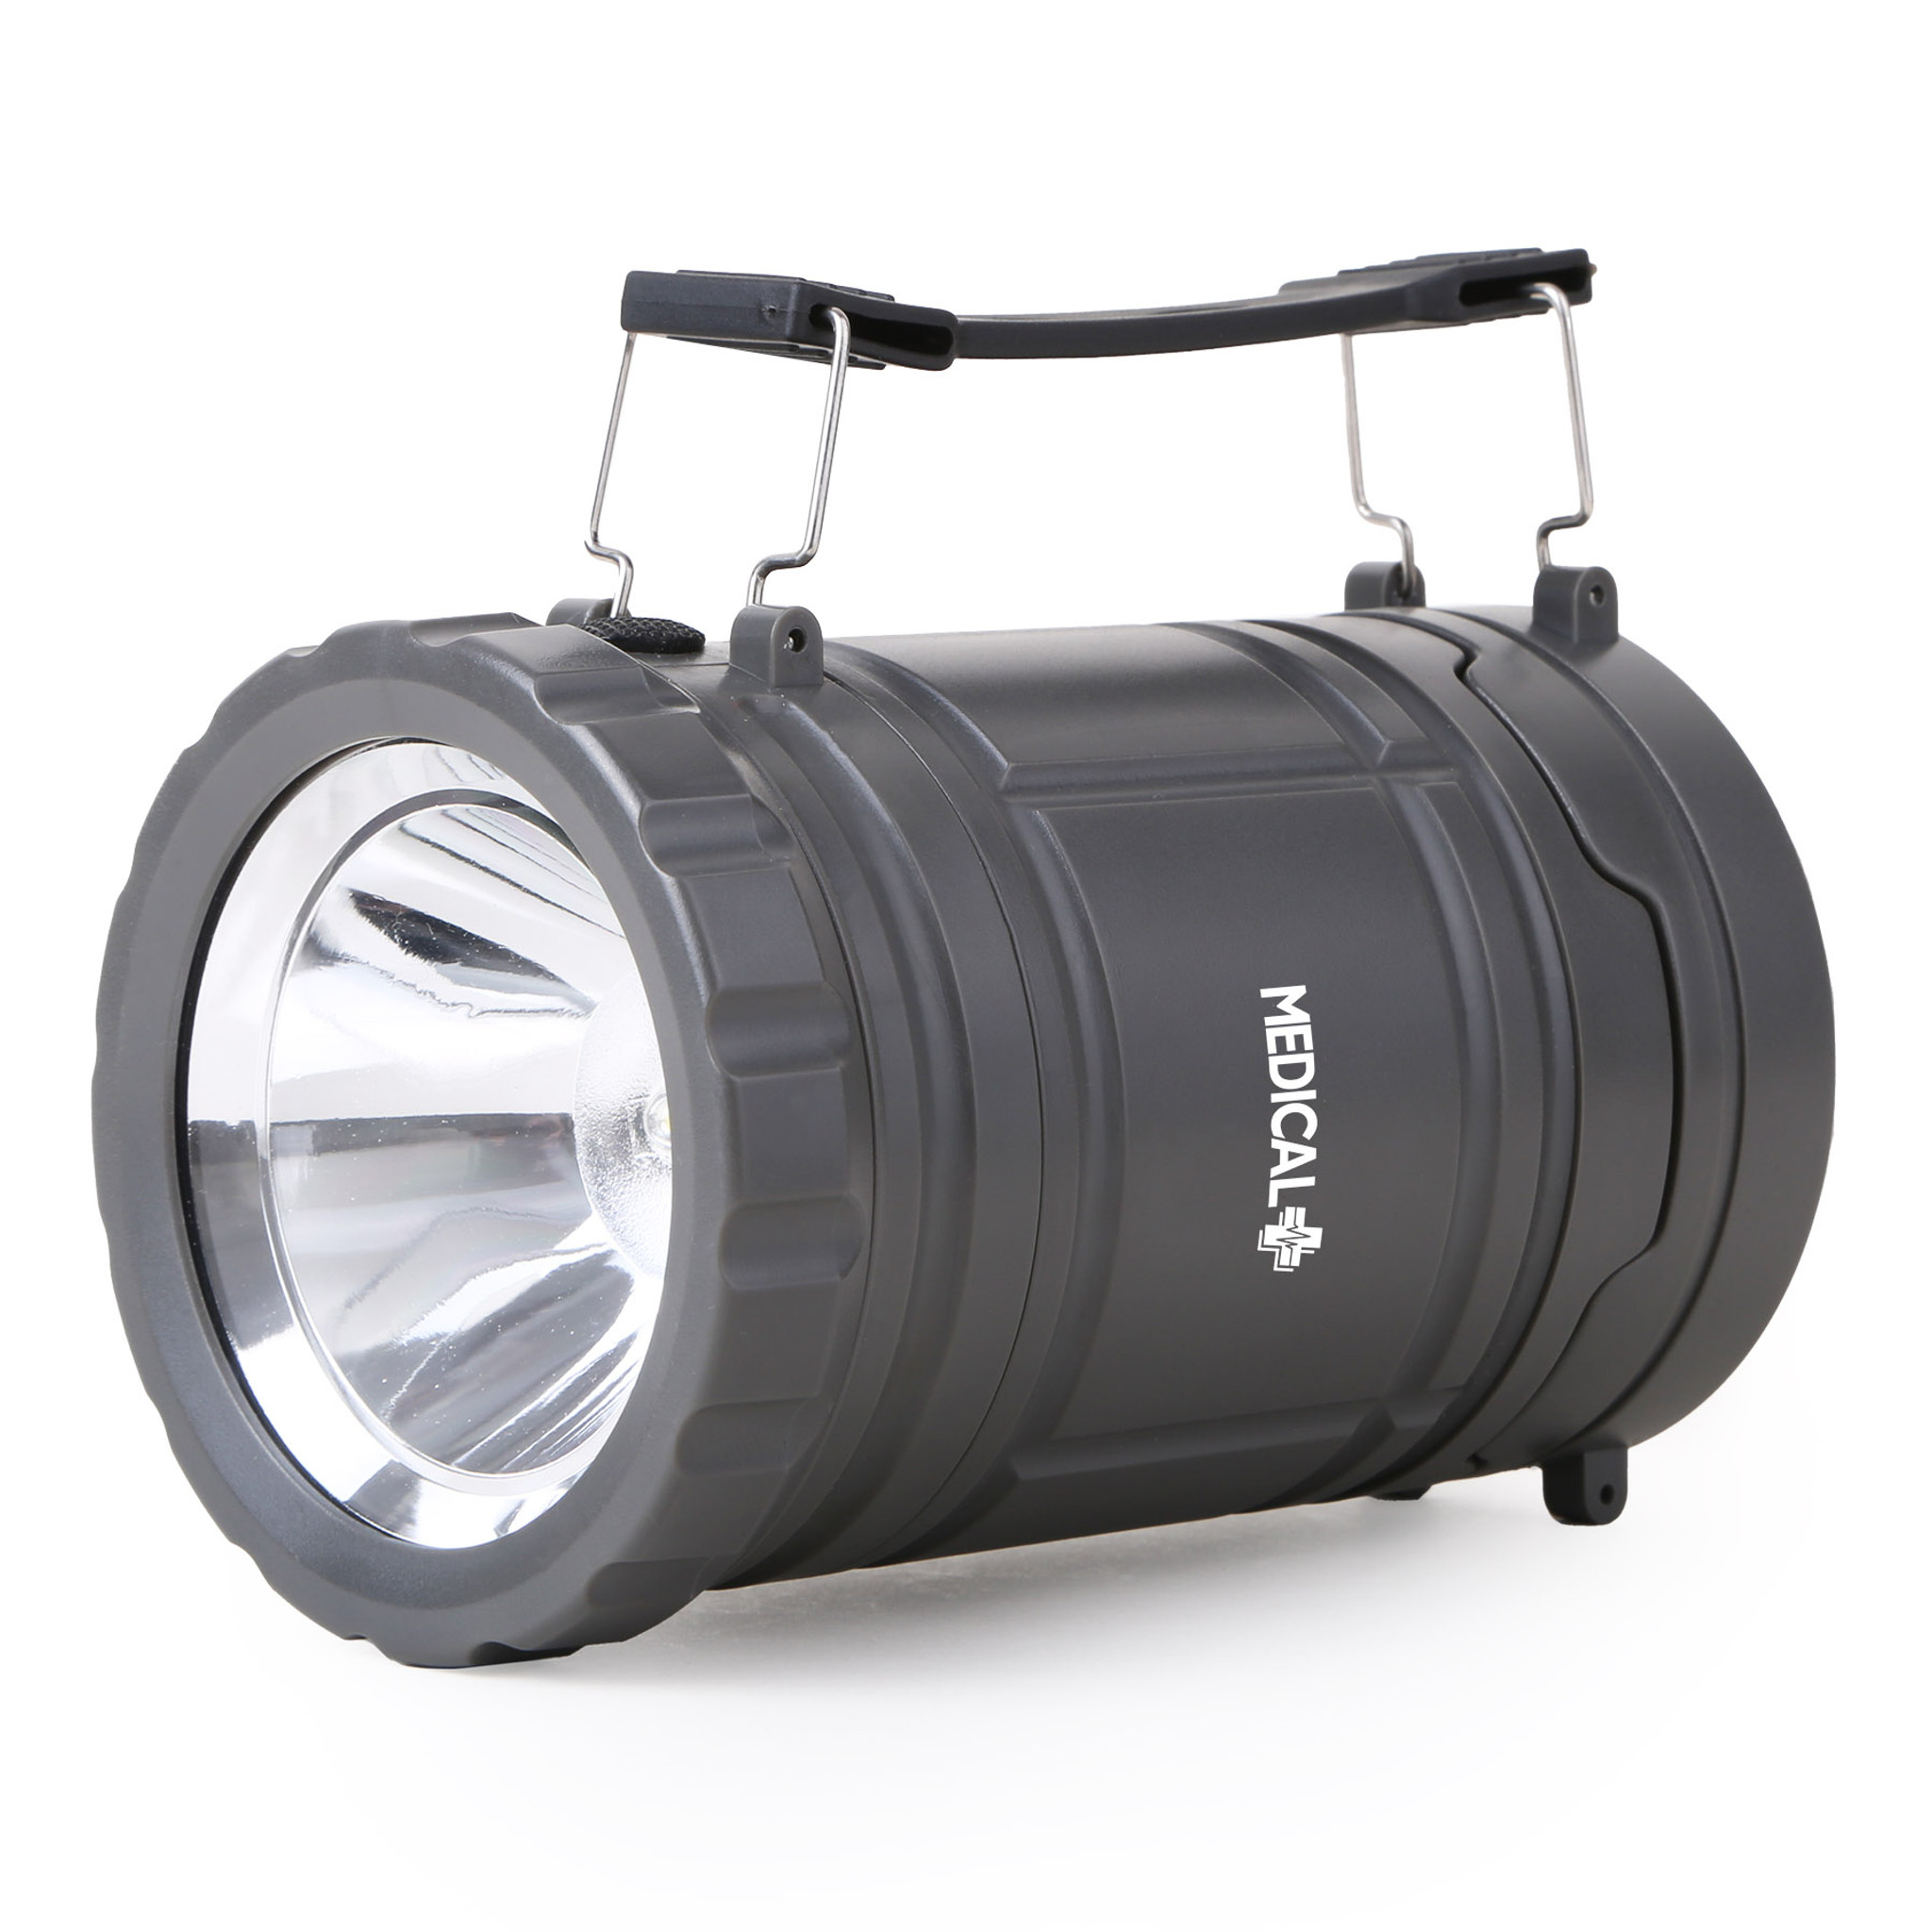 Torcher 2 In 1 Pop Up Lantern With Handle - HPG - Promotional Products  Supplier